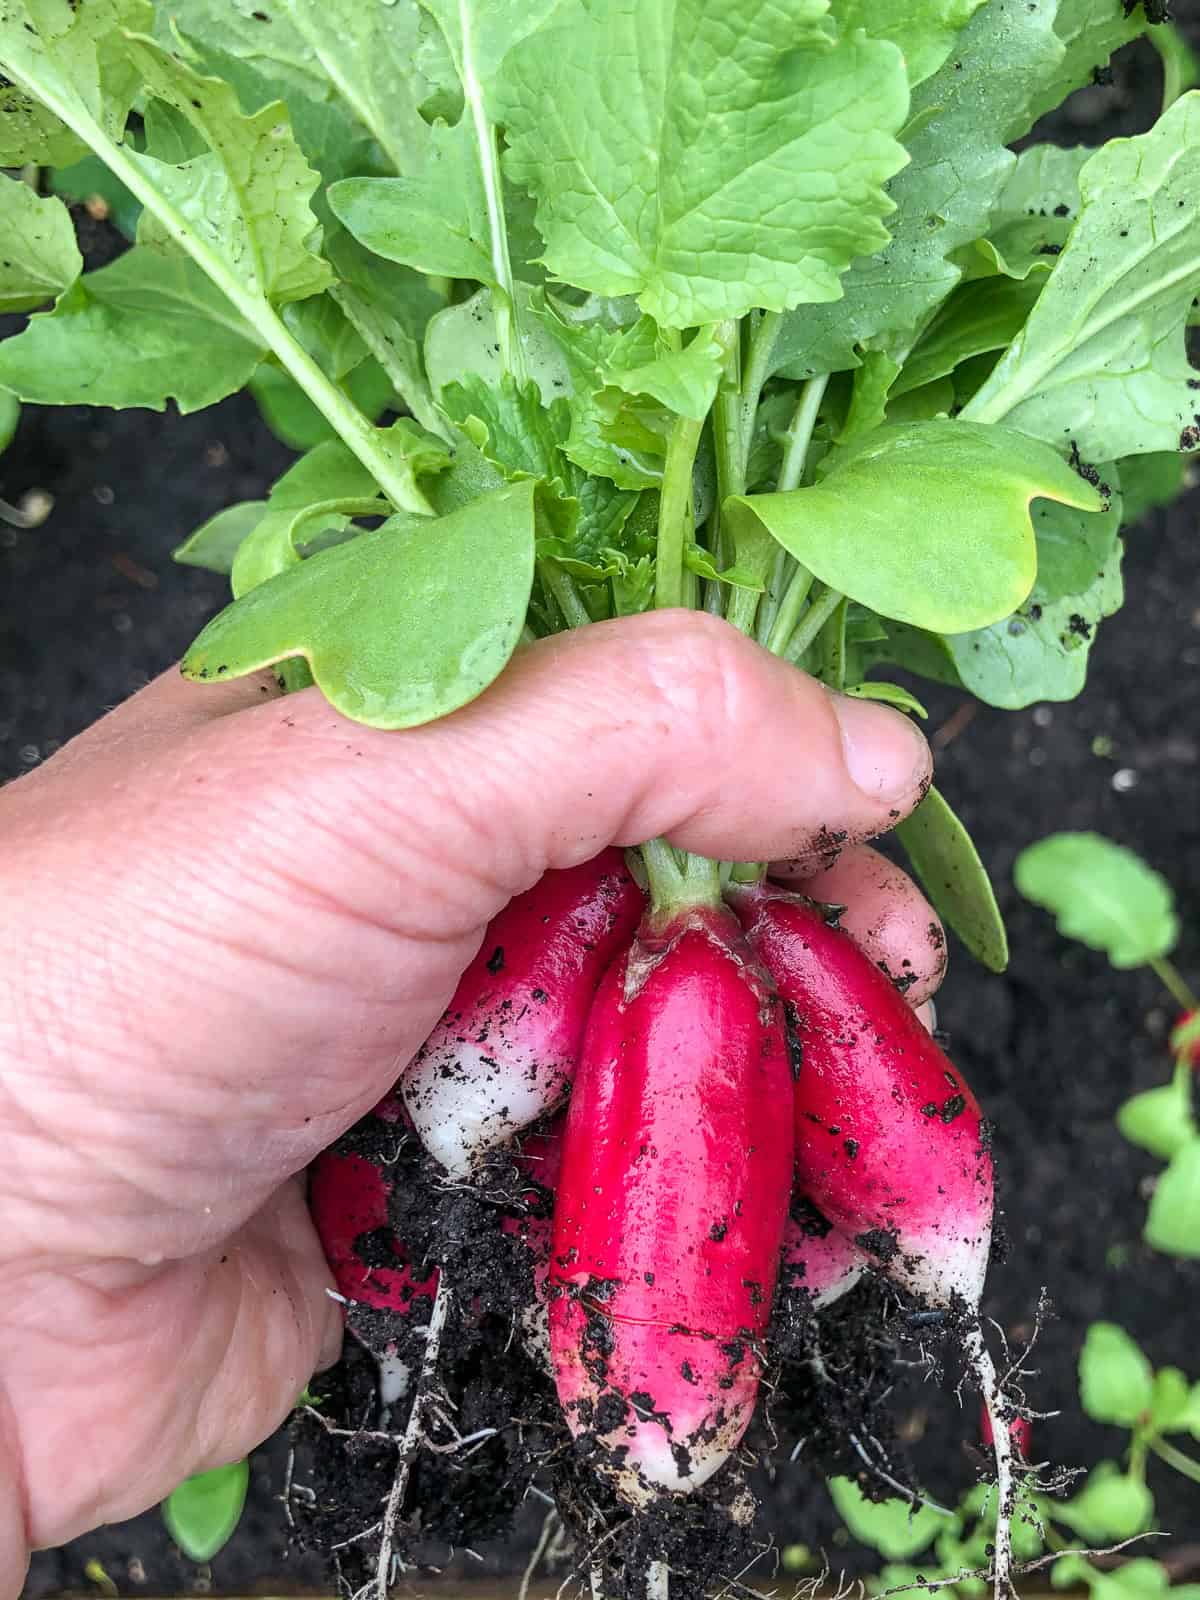 An image of a hand holding a bunch of freshly picked radishes.